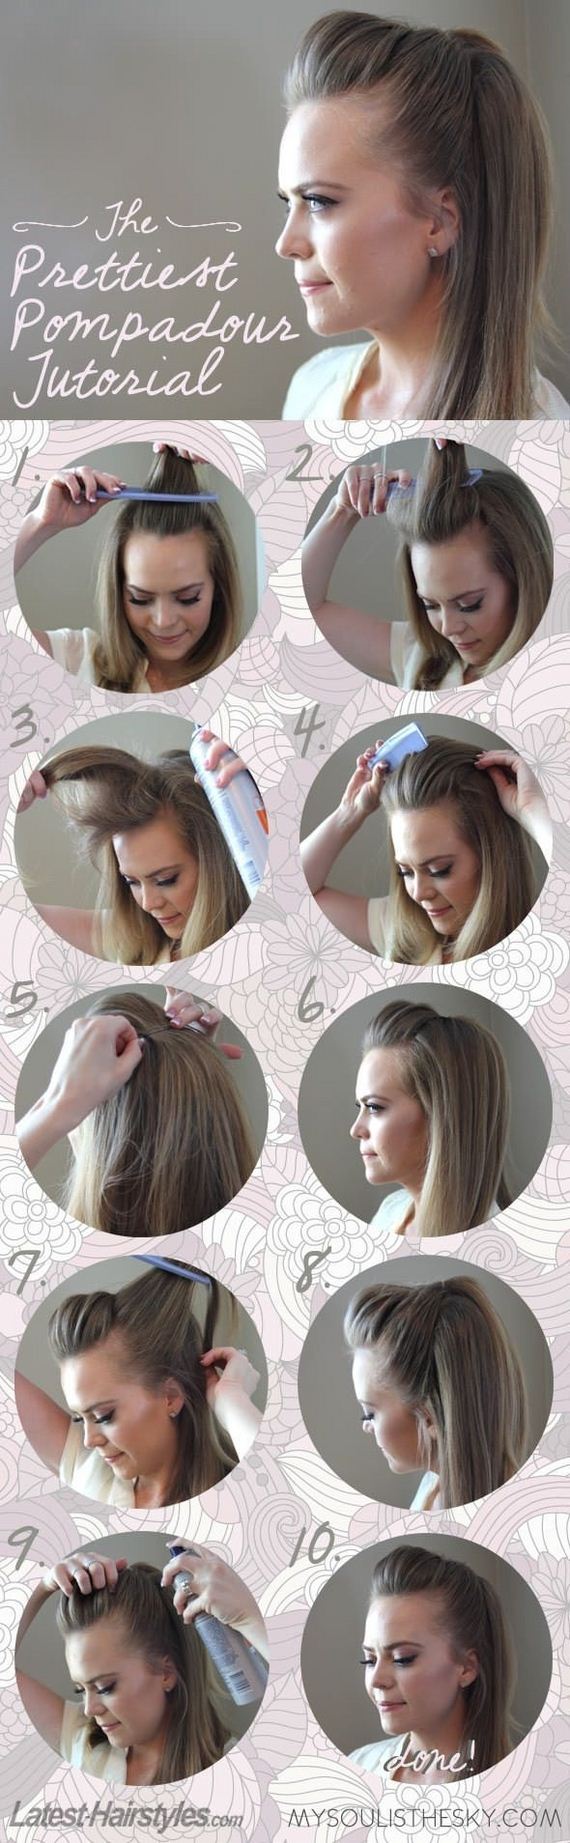 22-Five-Minute-Hairstyles